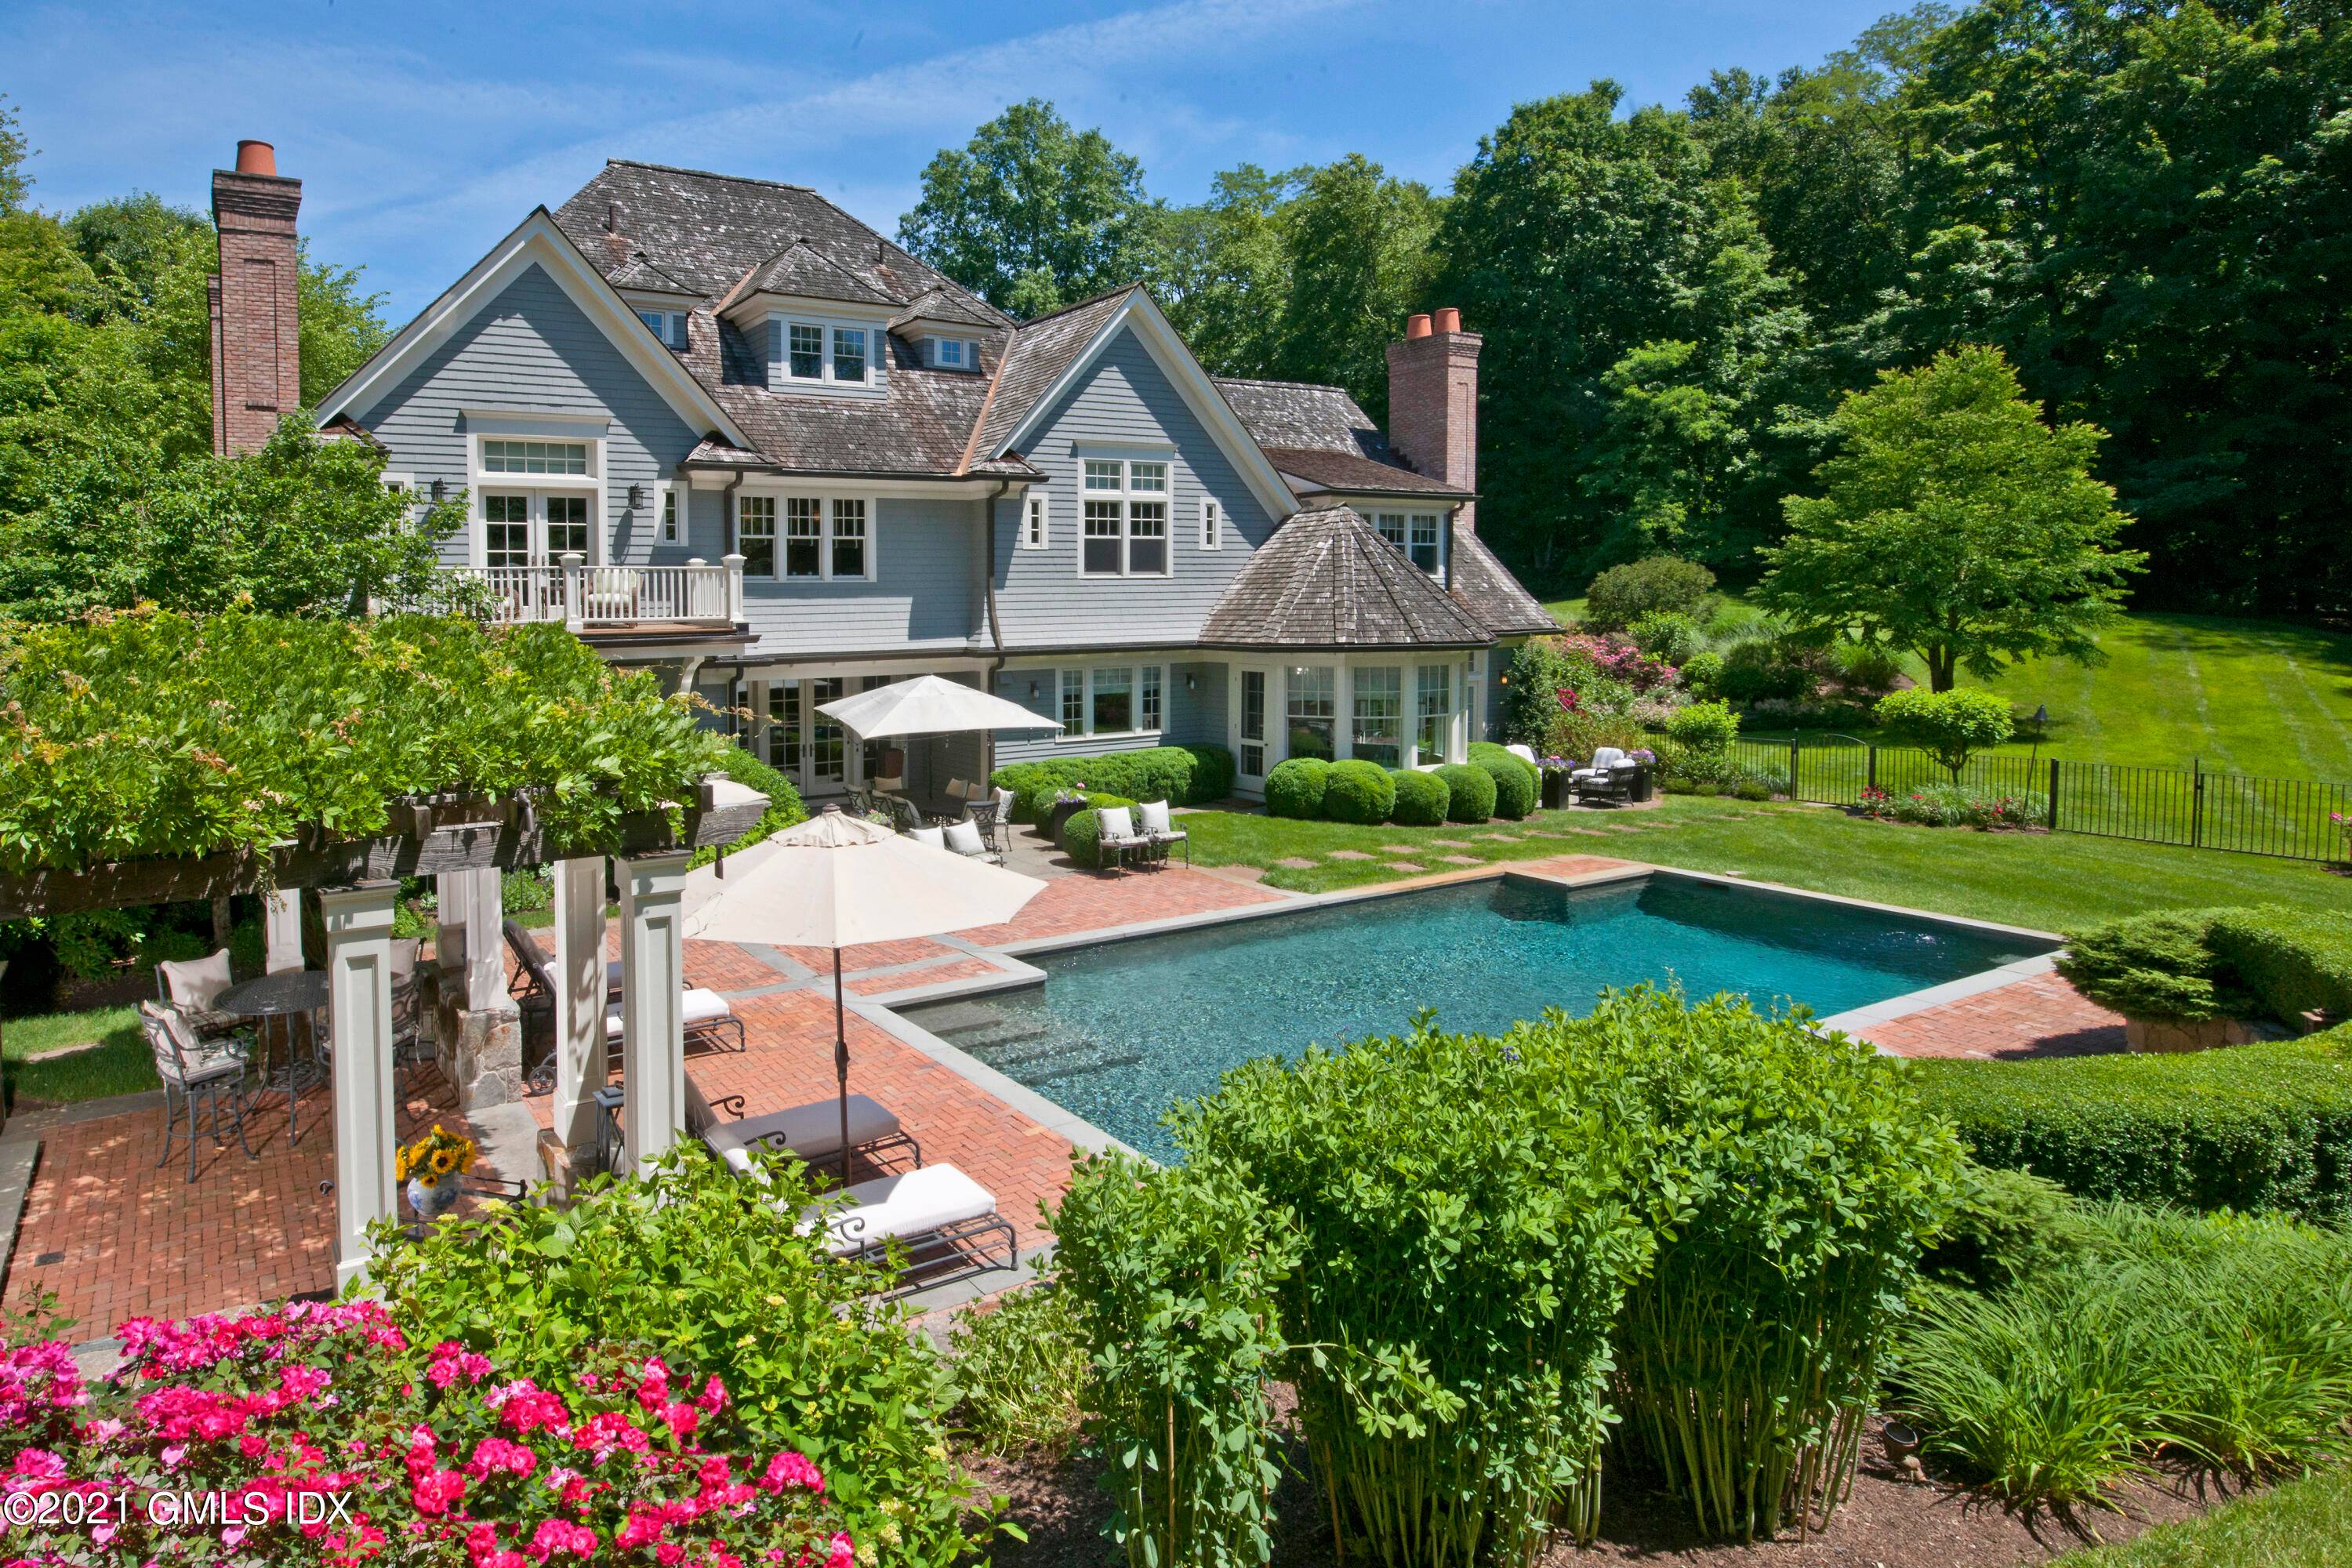 Better than new ! Magnificent 6 bedroom stone shingle Colonial by famed Granoff Architects sited on a private 4.